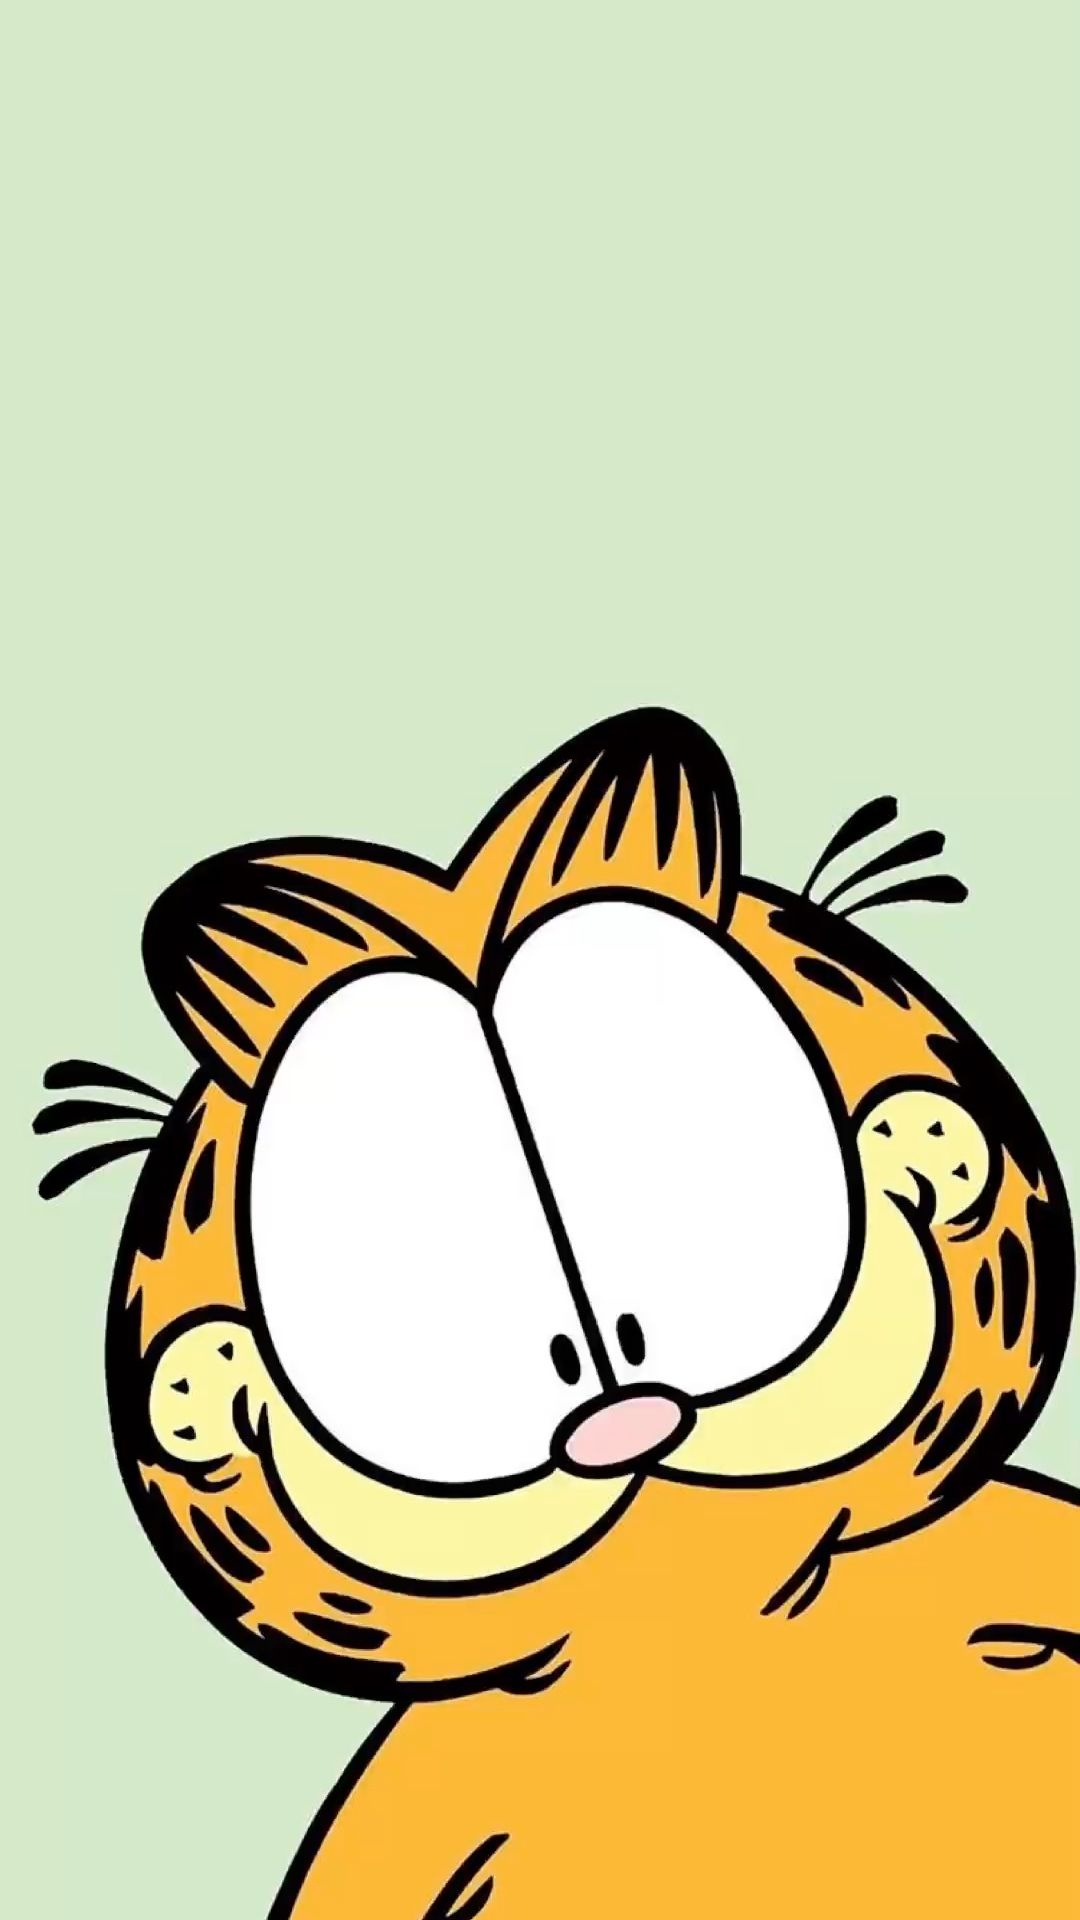 Garfield: A laid-back, arrogant, and utterly sarcastic cat owned by an average man named John Arbuckle. 1080x1920 Full HD Wallpaper.